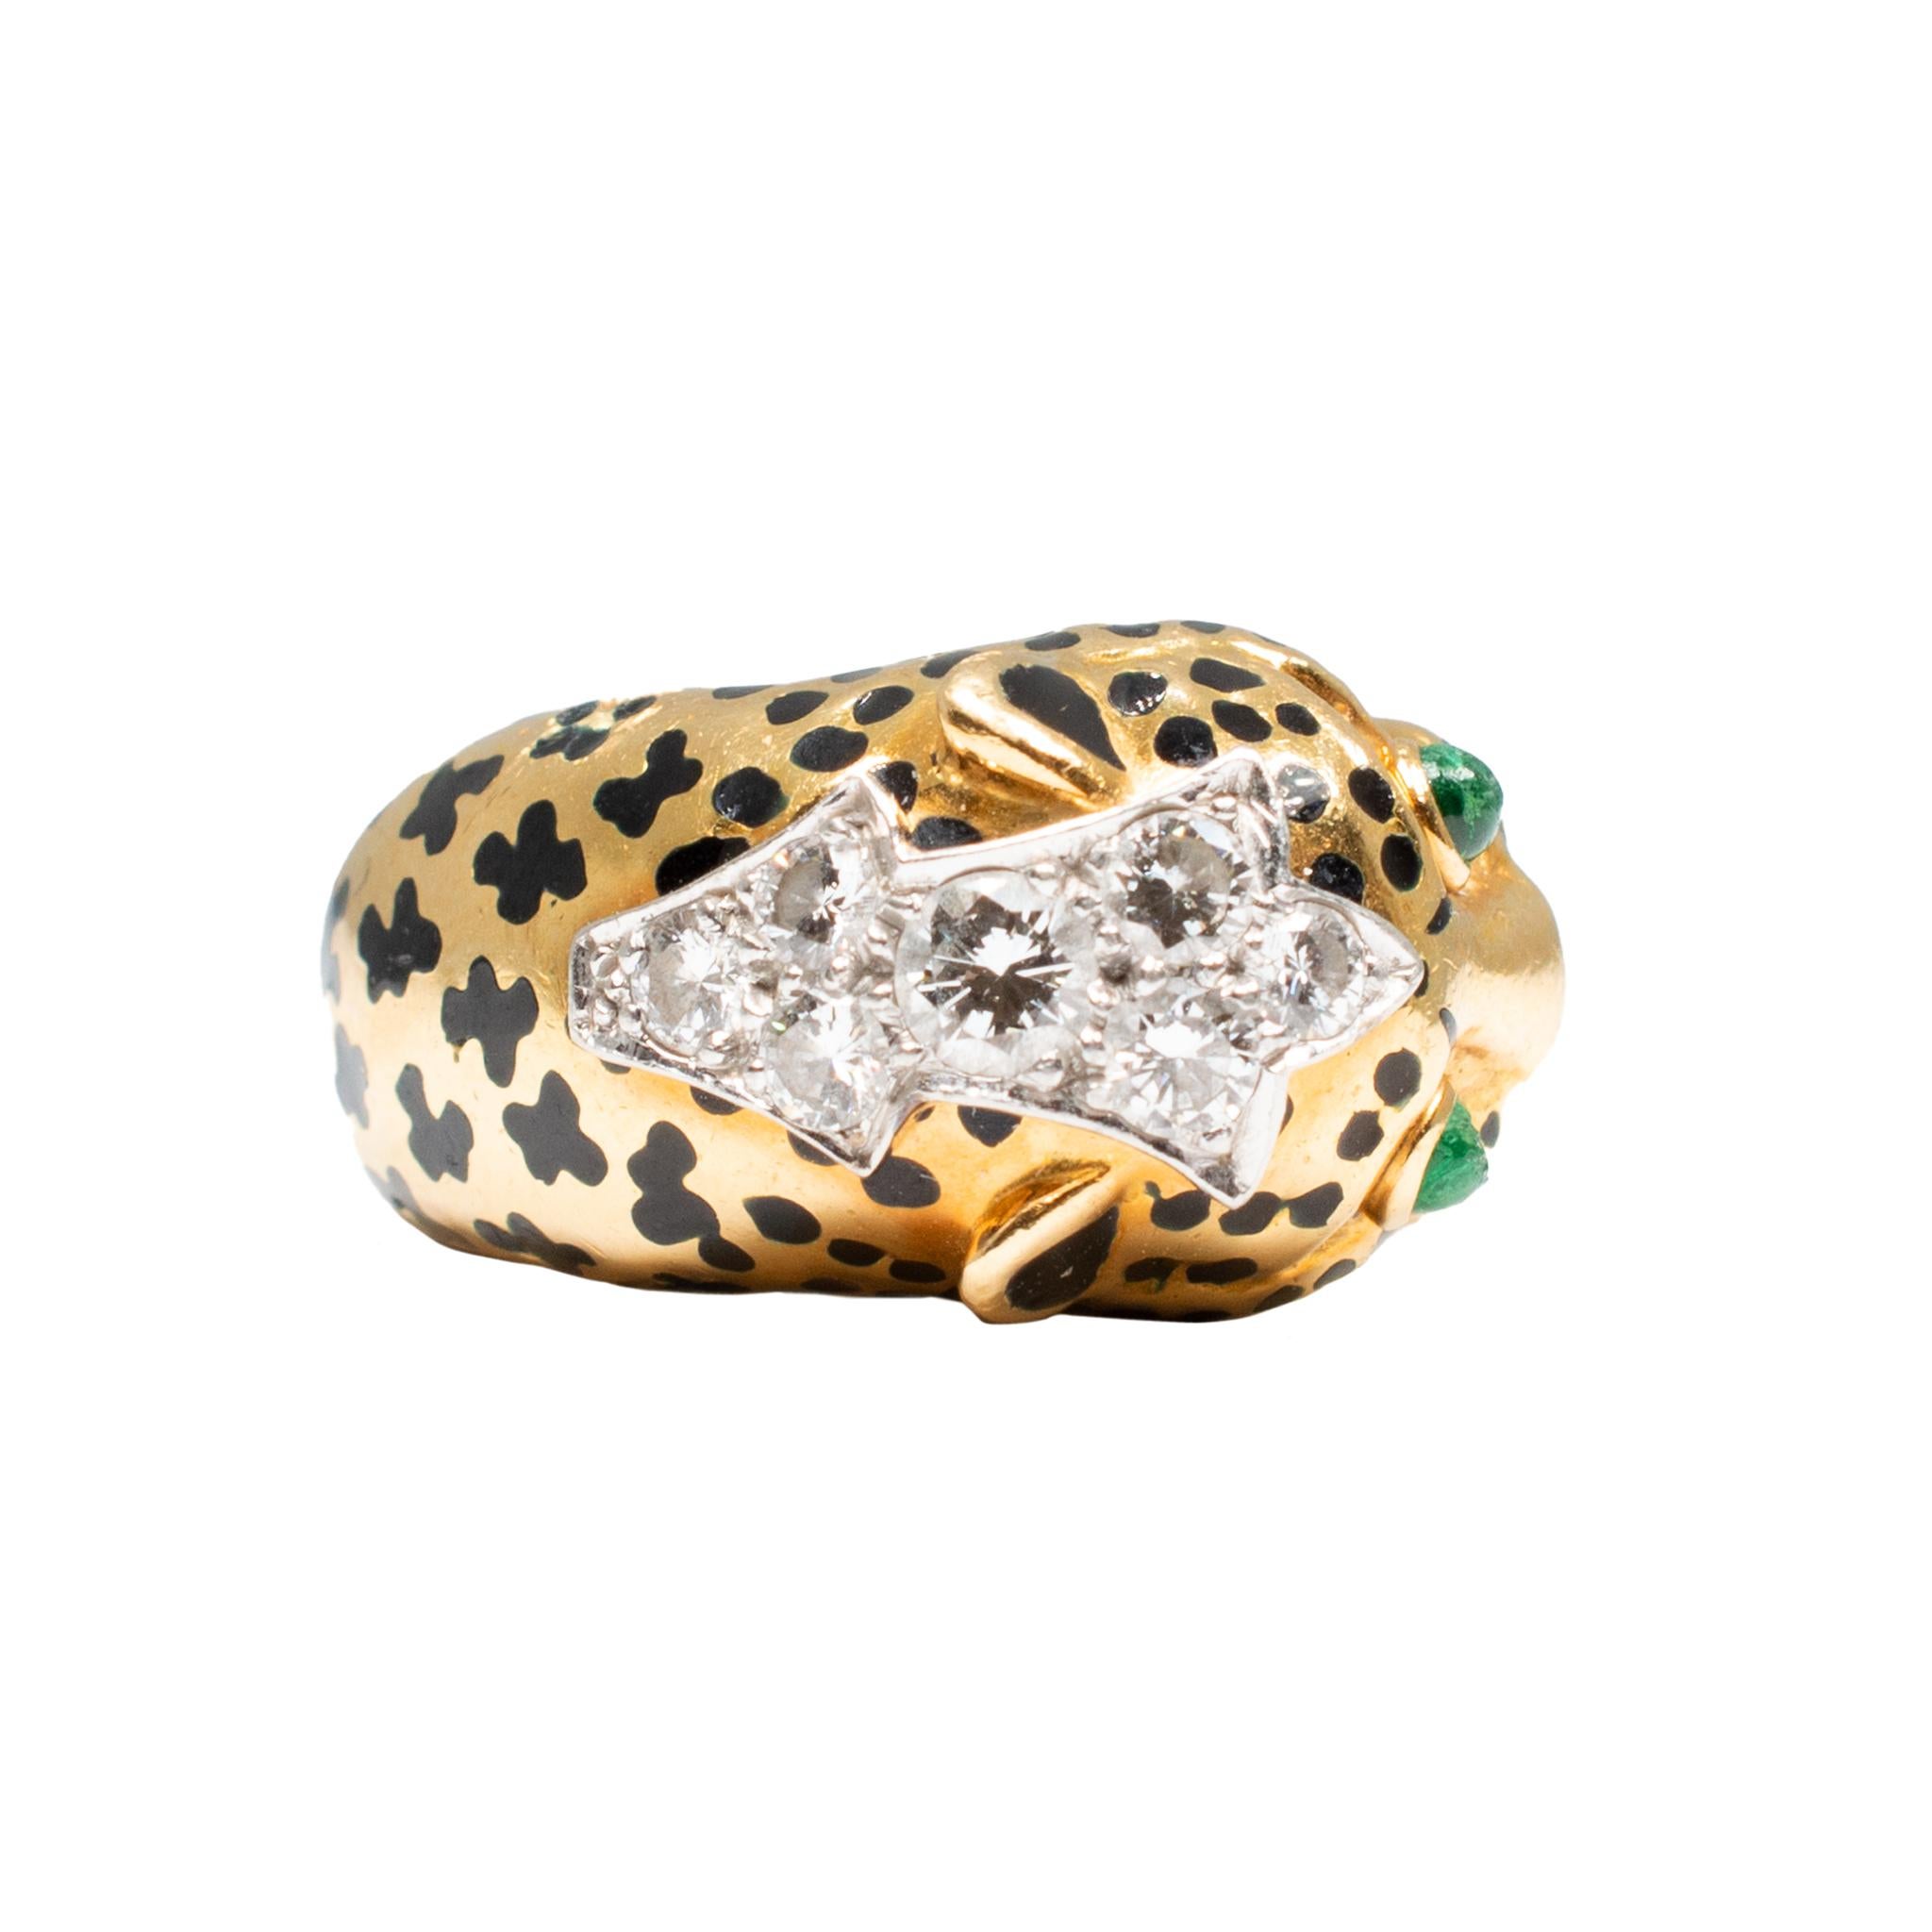 Signed David Webb Platinum 18K Yellow Gold Cheetah Diamond Cocktail Ring In Excellent Condition For Sale In Houston, TX